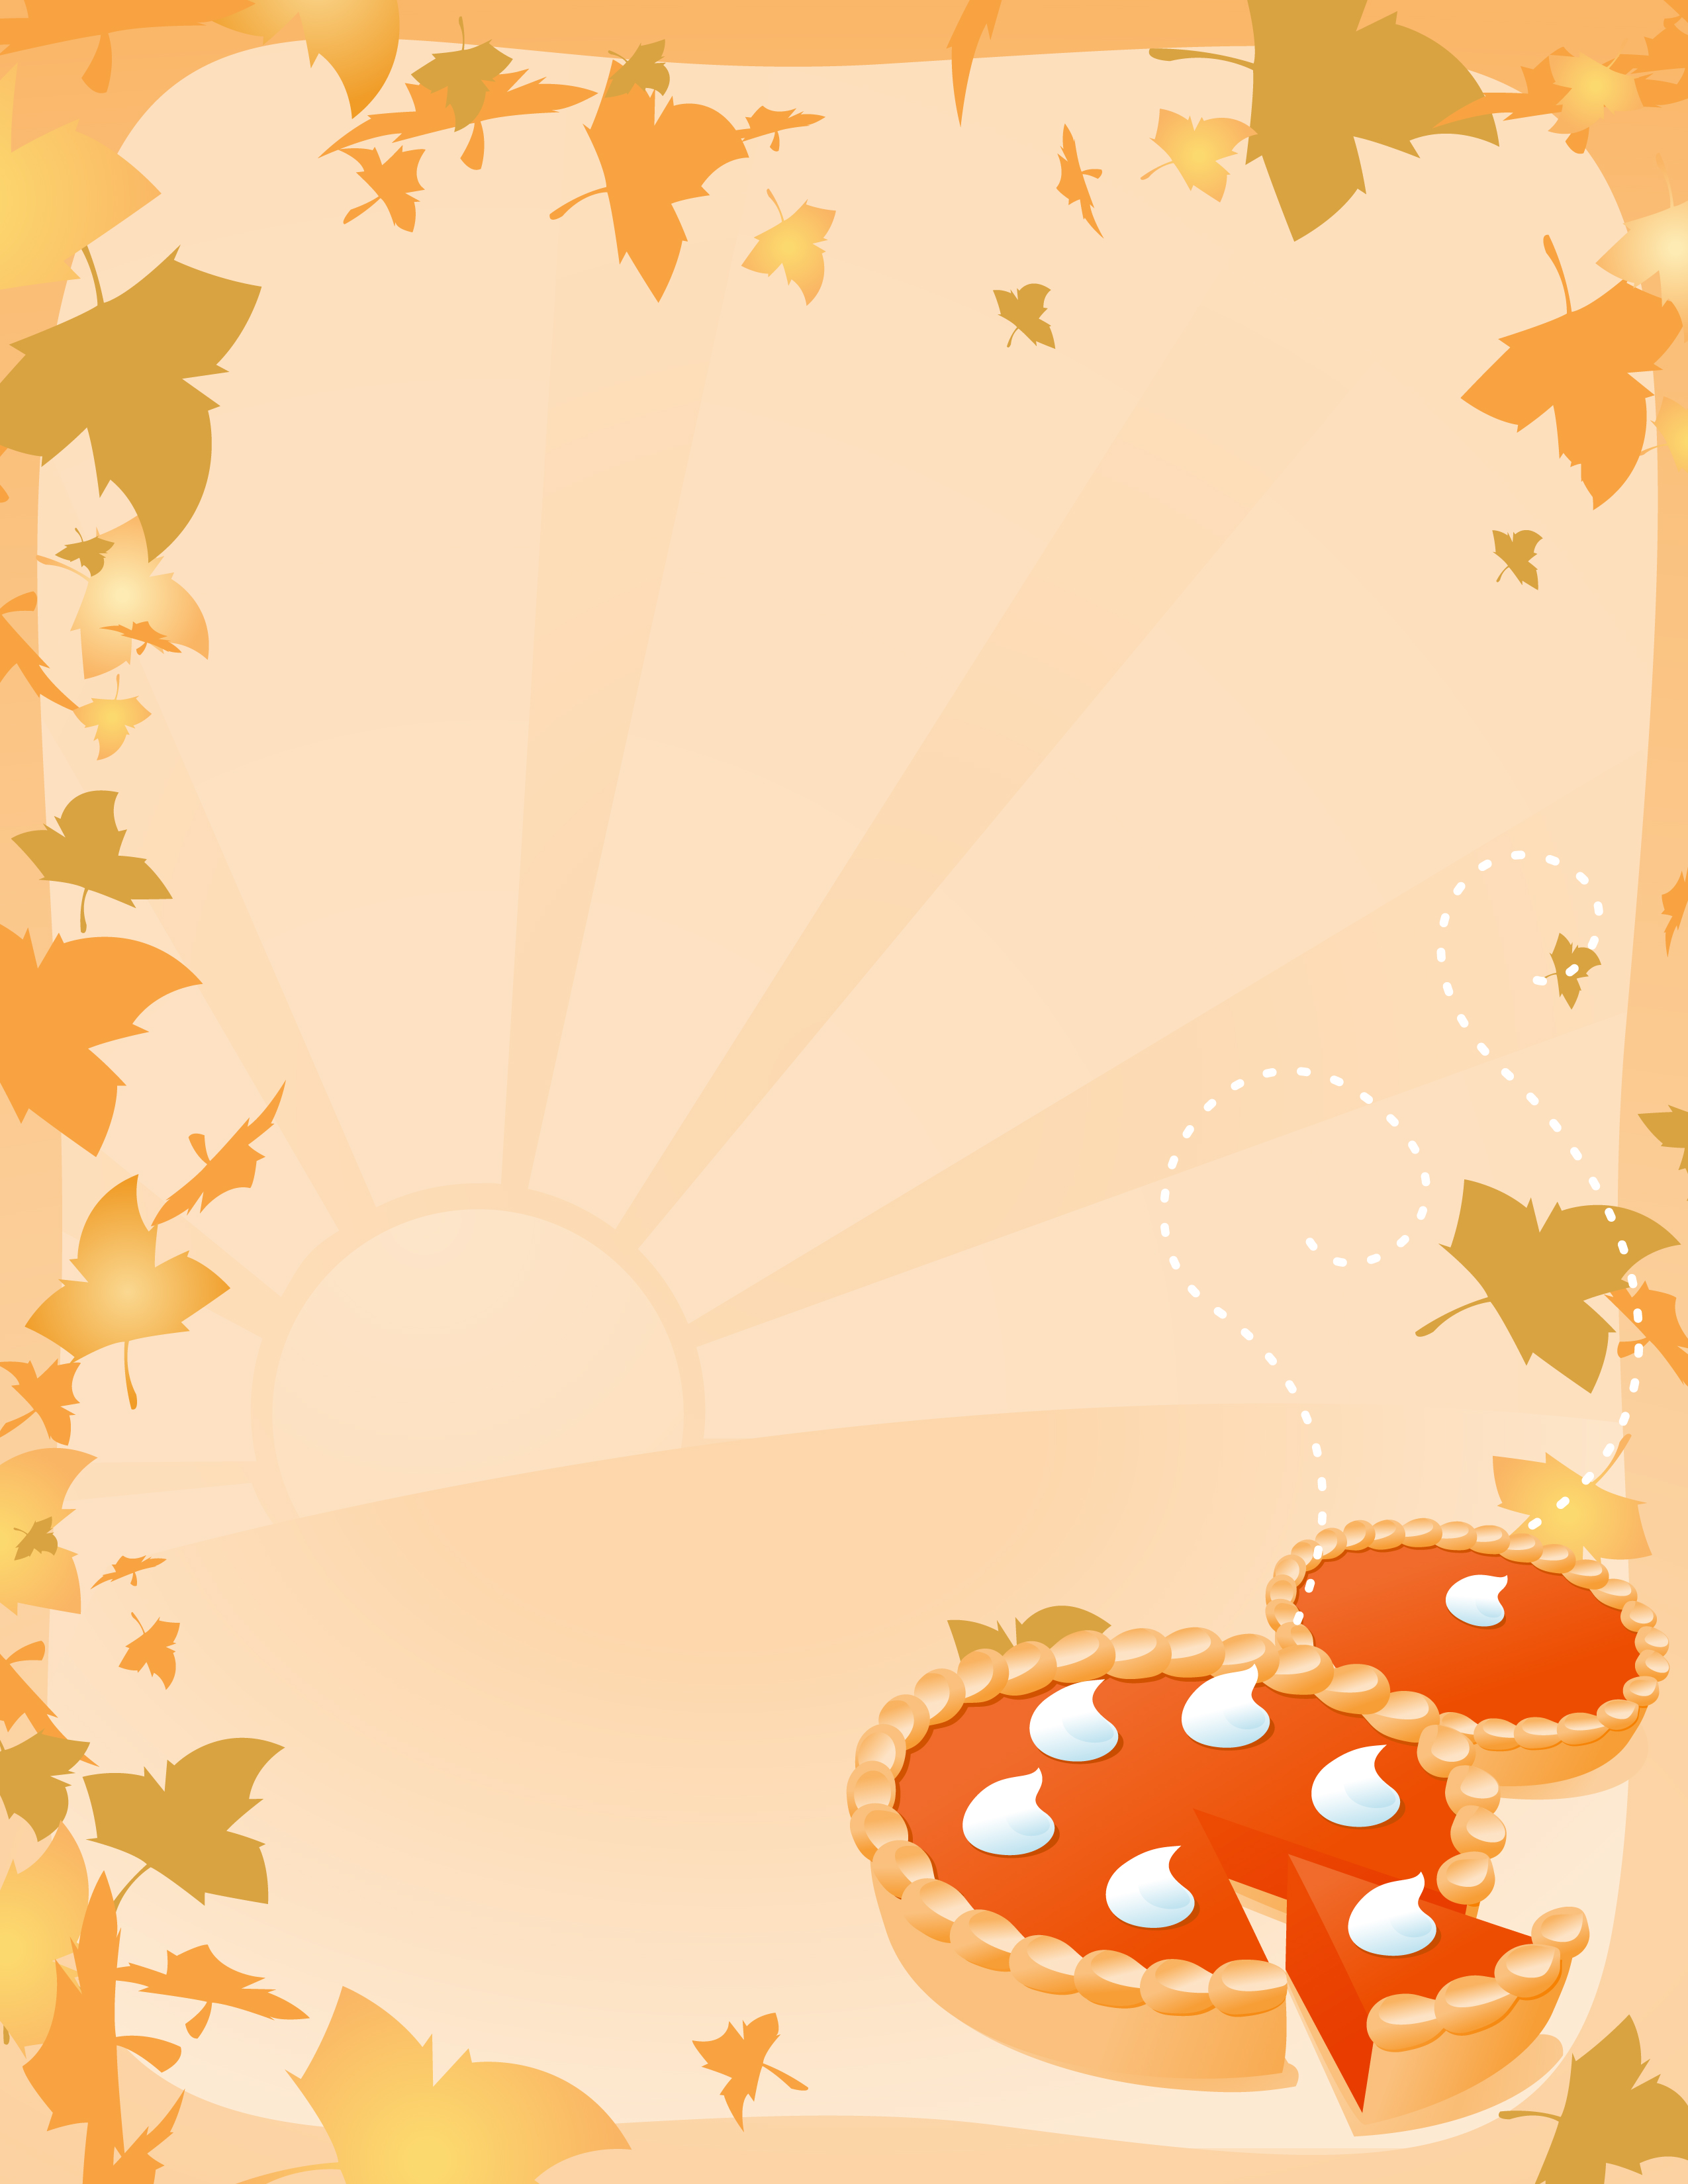 Pumpkin Pie Background Vector Illustration Of Two Pies With